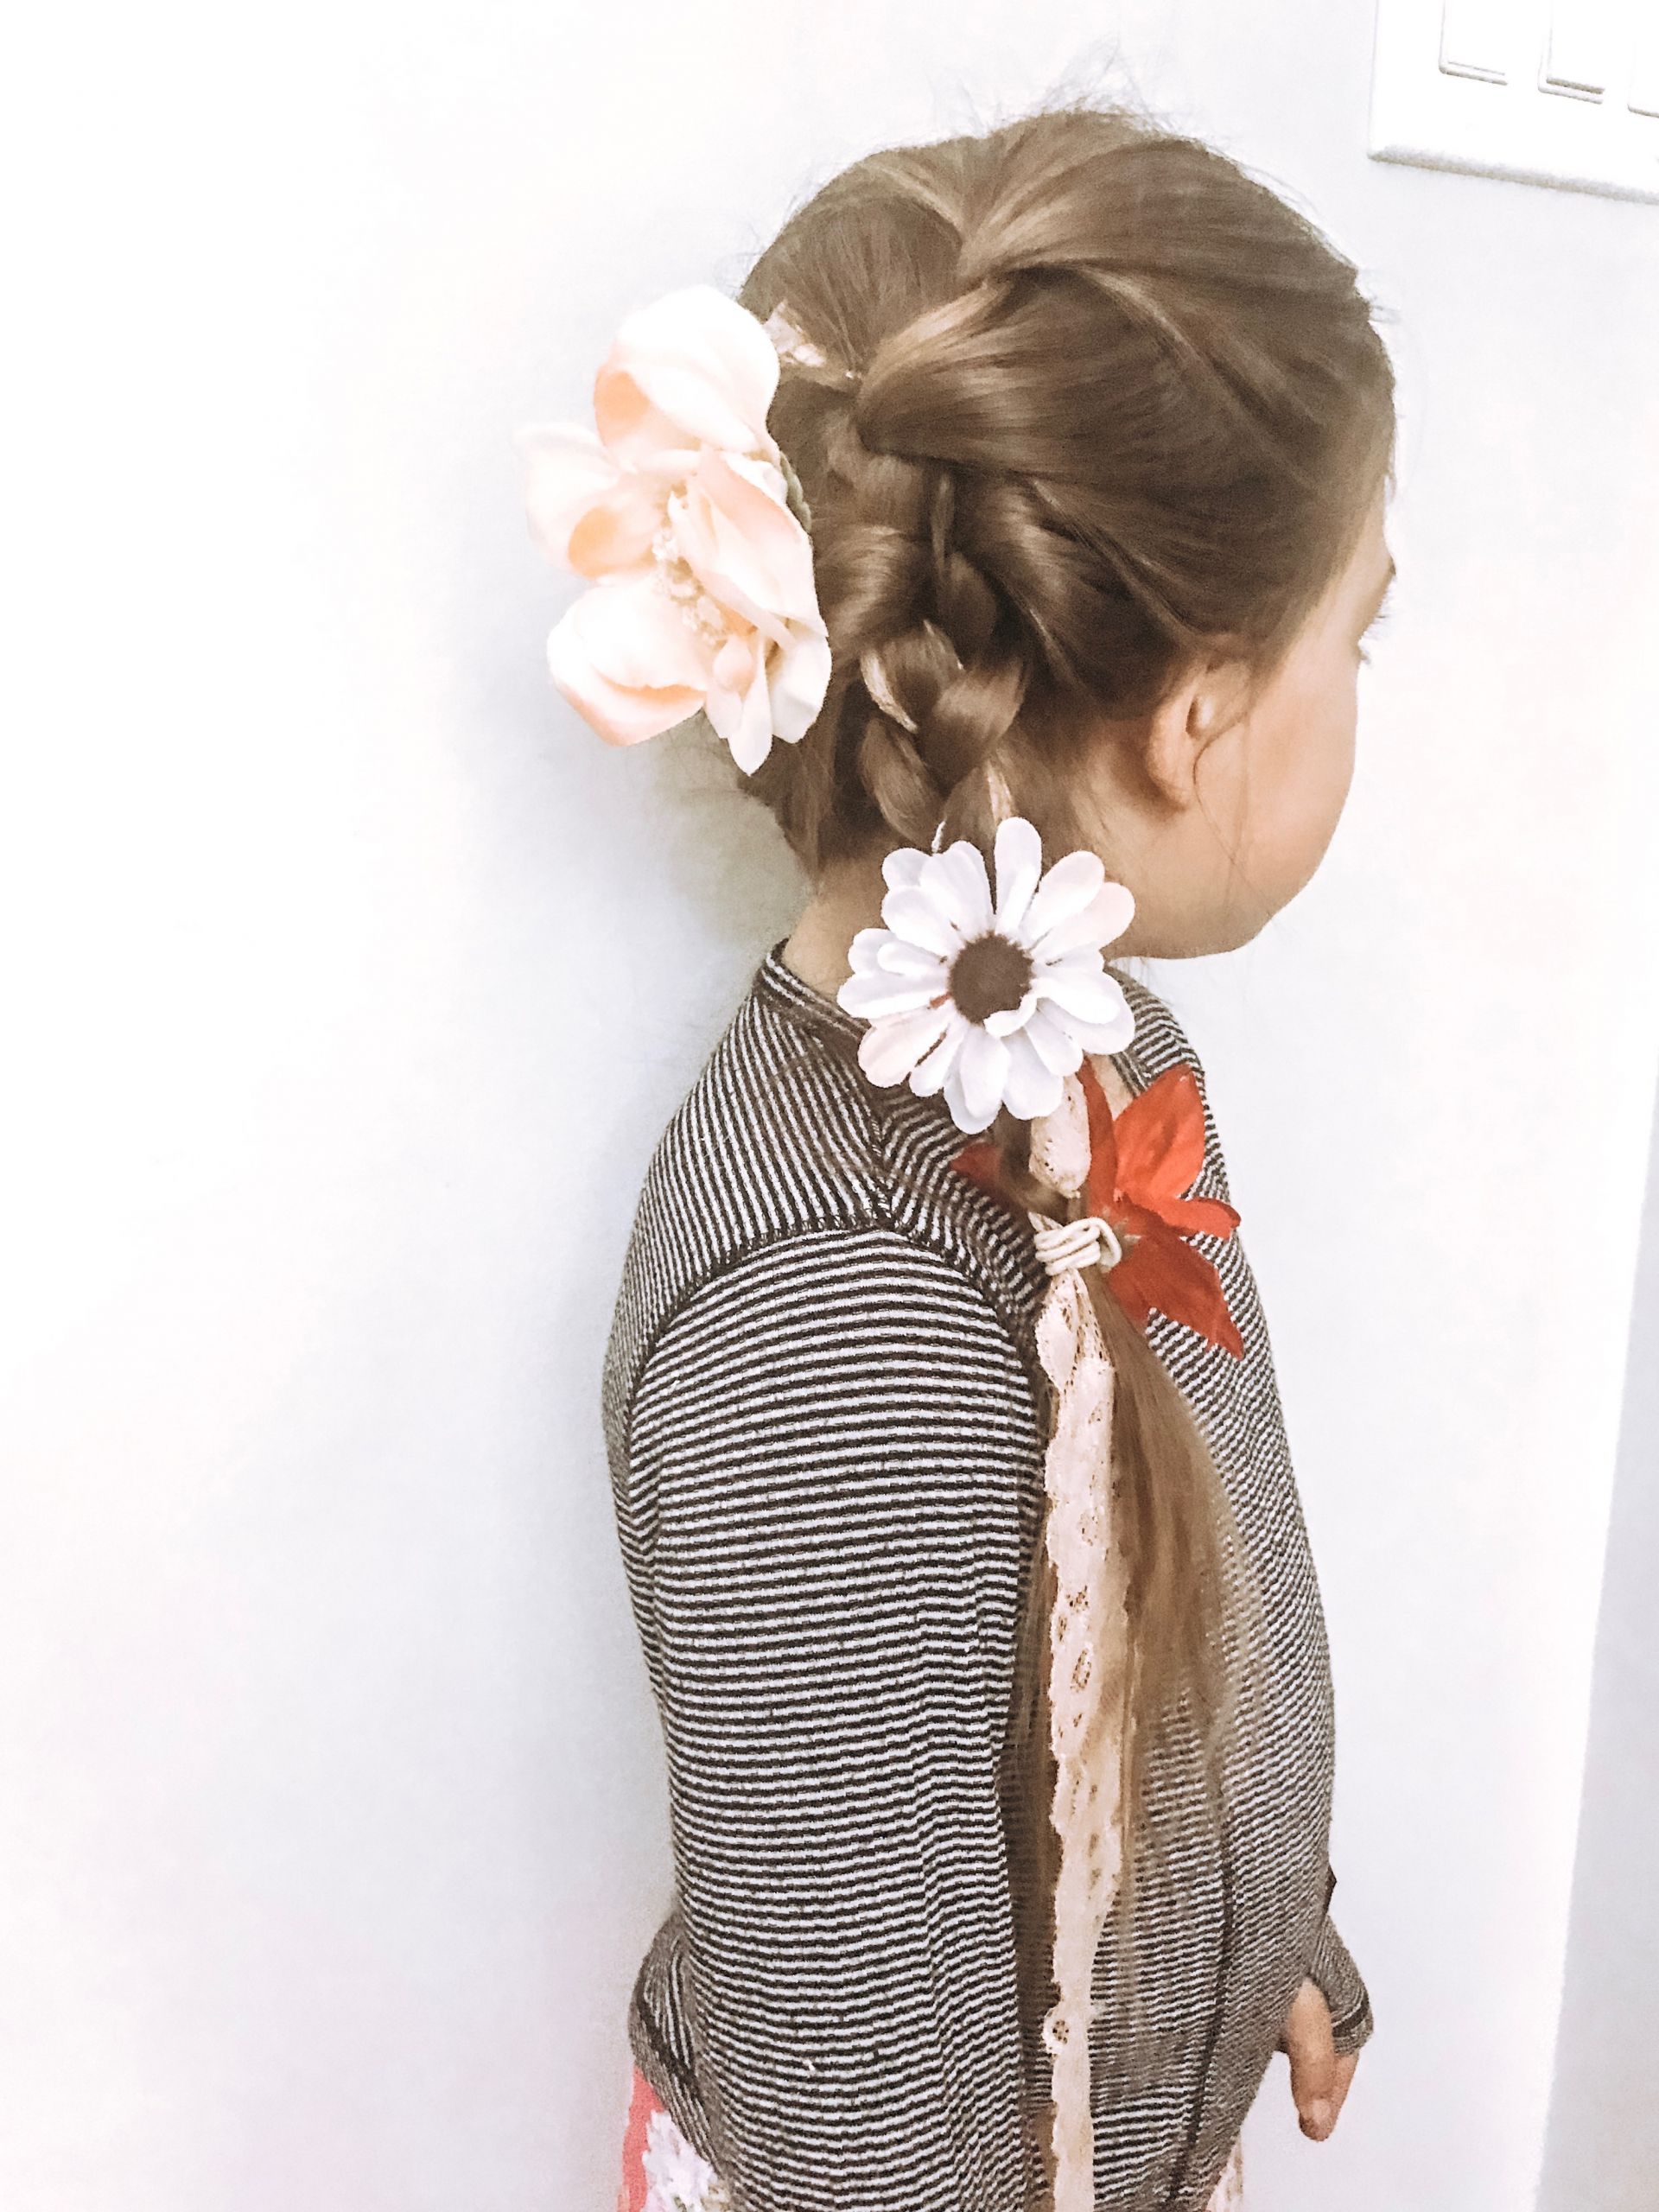 Easy Princess Hairstyles
 These DIY Disney Princess Hairstyles Are So Easy to Create